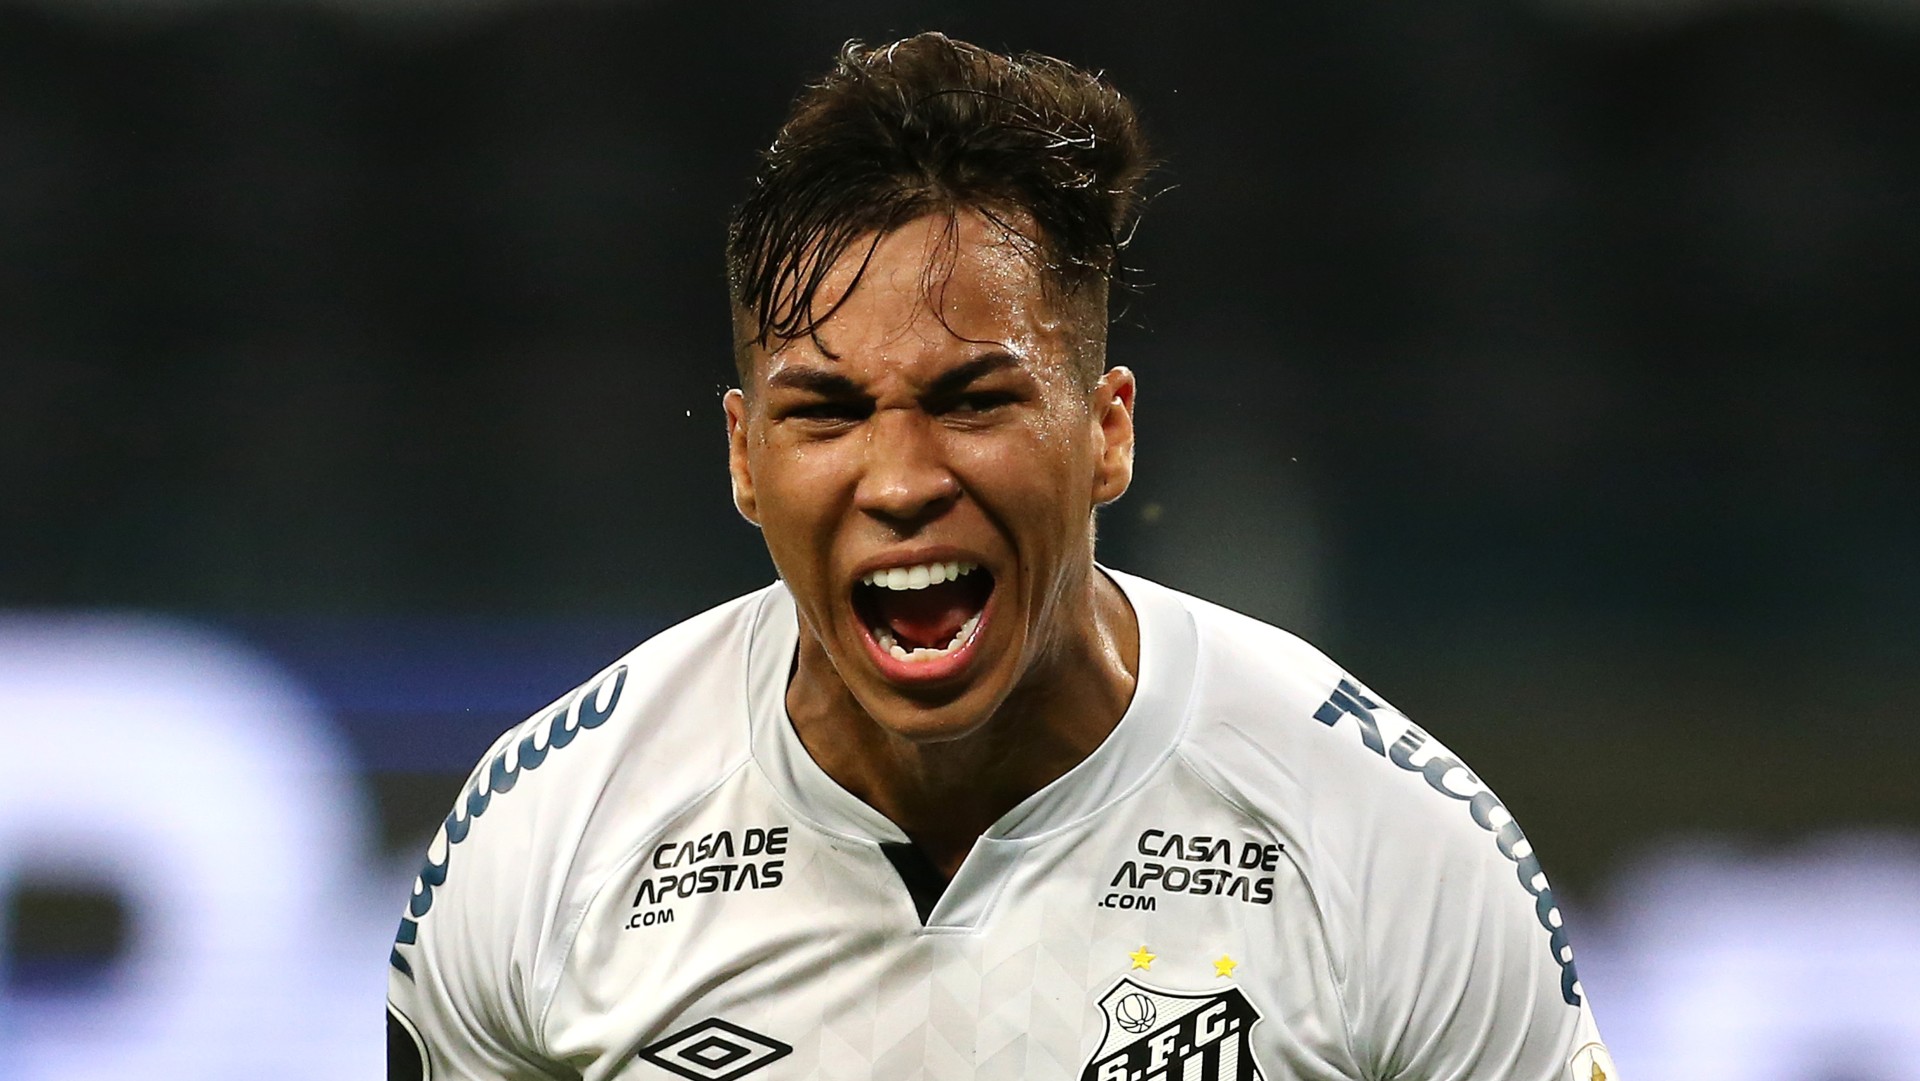 In this player analysis, we took a closer look at Juventus’ new signing Kaio Jorge and discussed whether he is a good fit for the Bianconeri